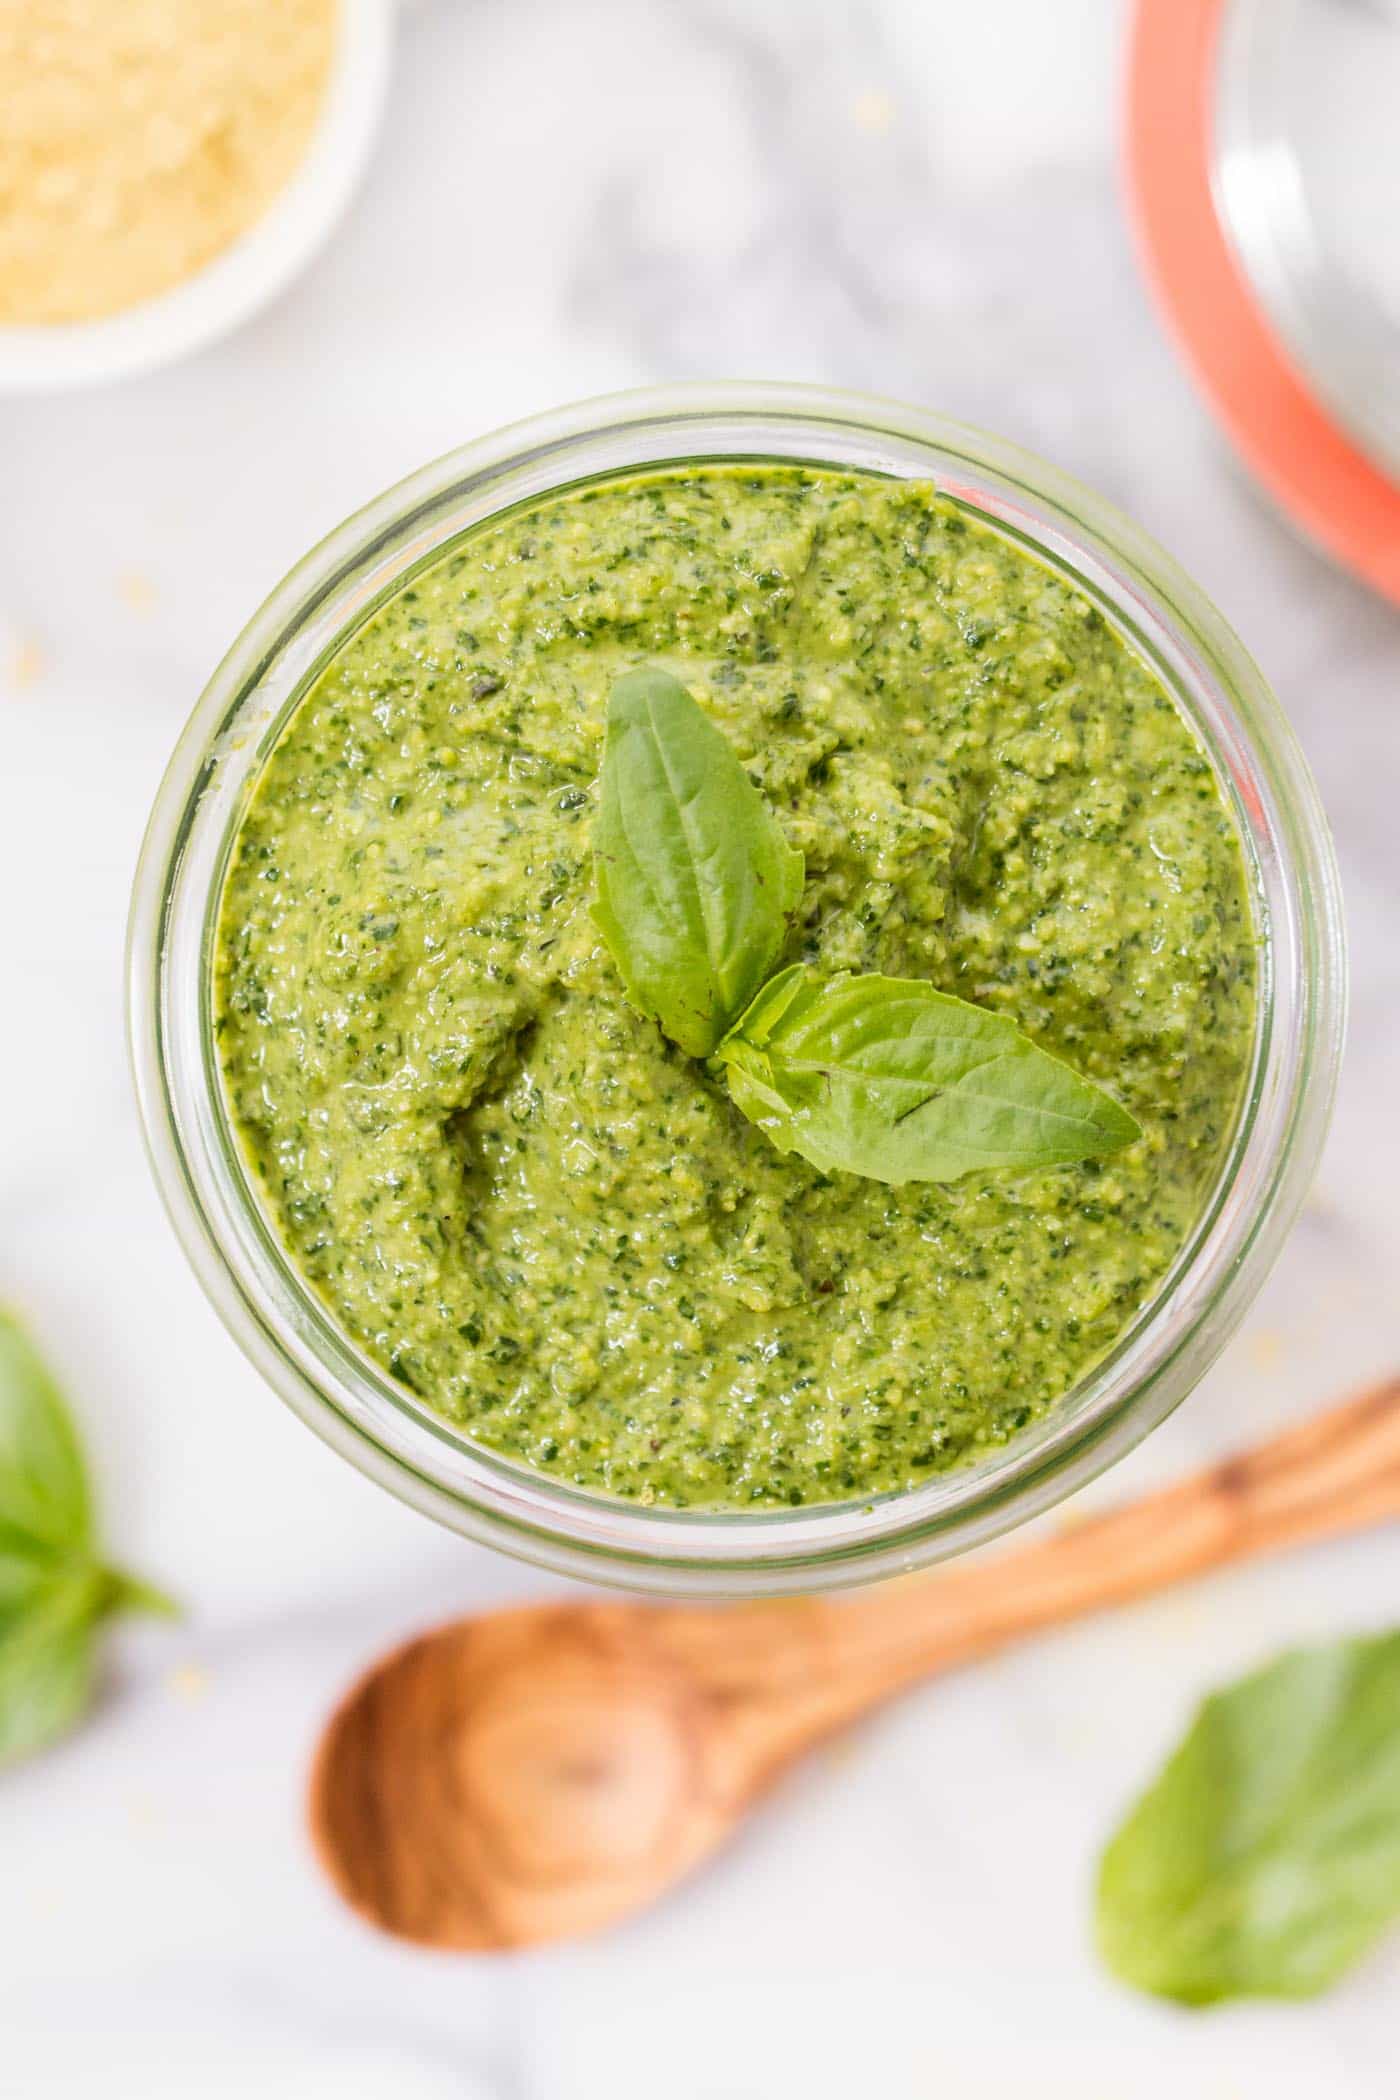 Overhead view of a jar of pesto with a sprig of basil on top, with a wooden spoon and basil leaves to the side